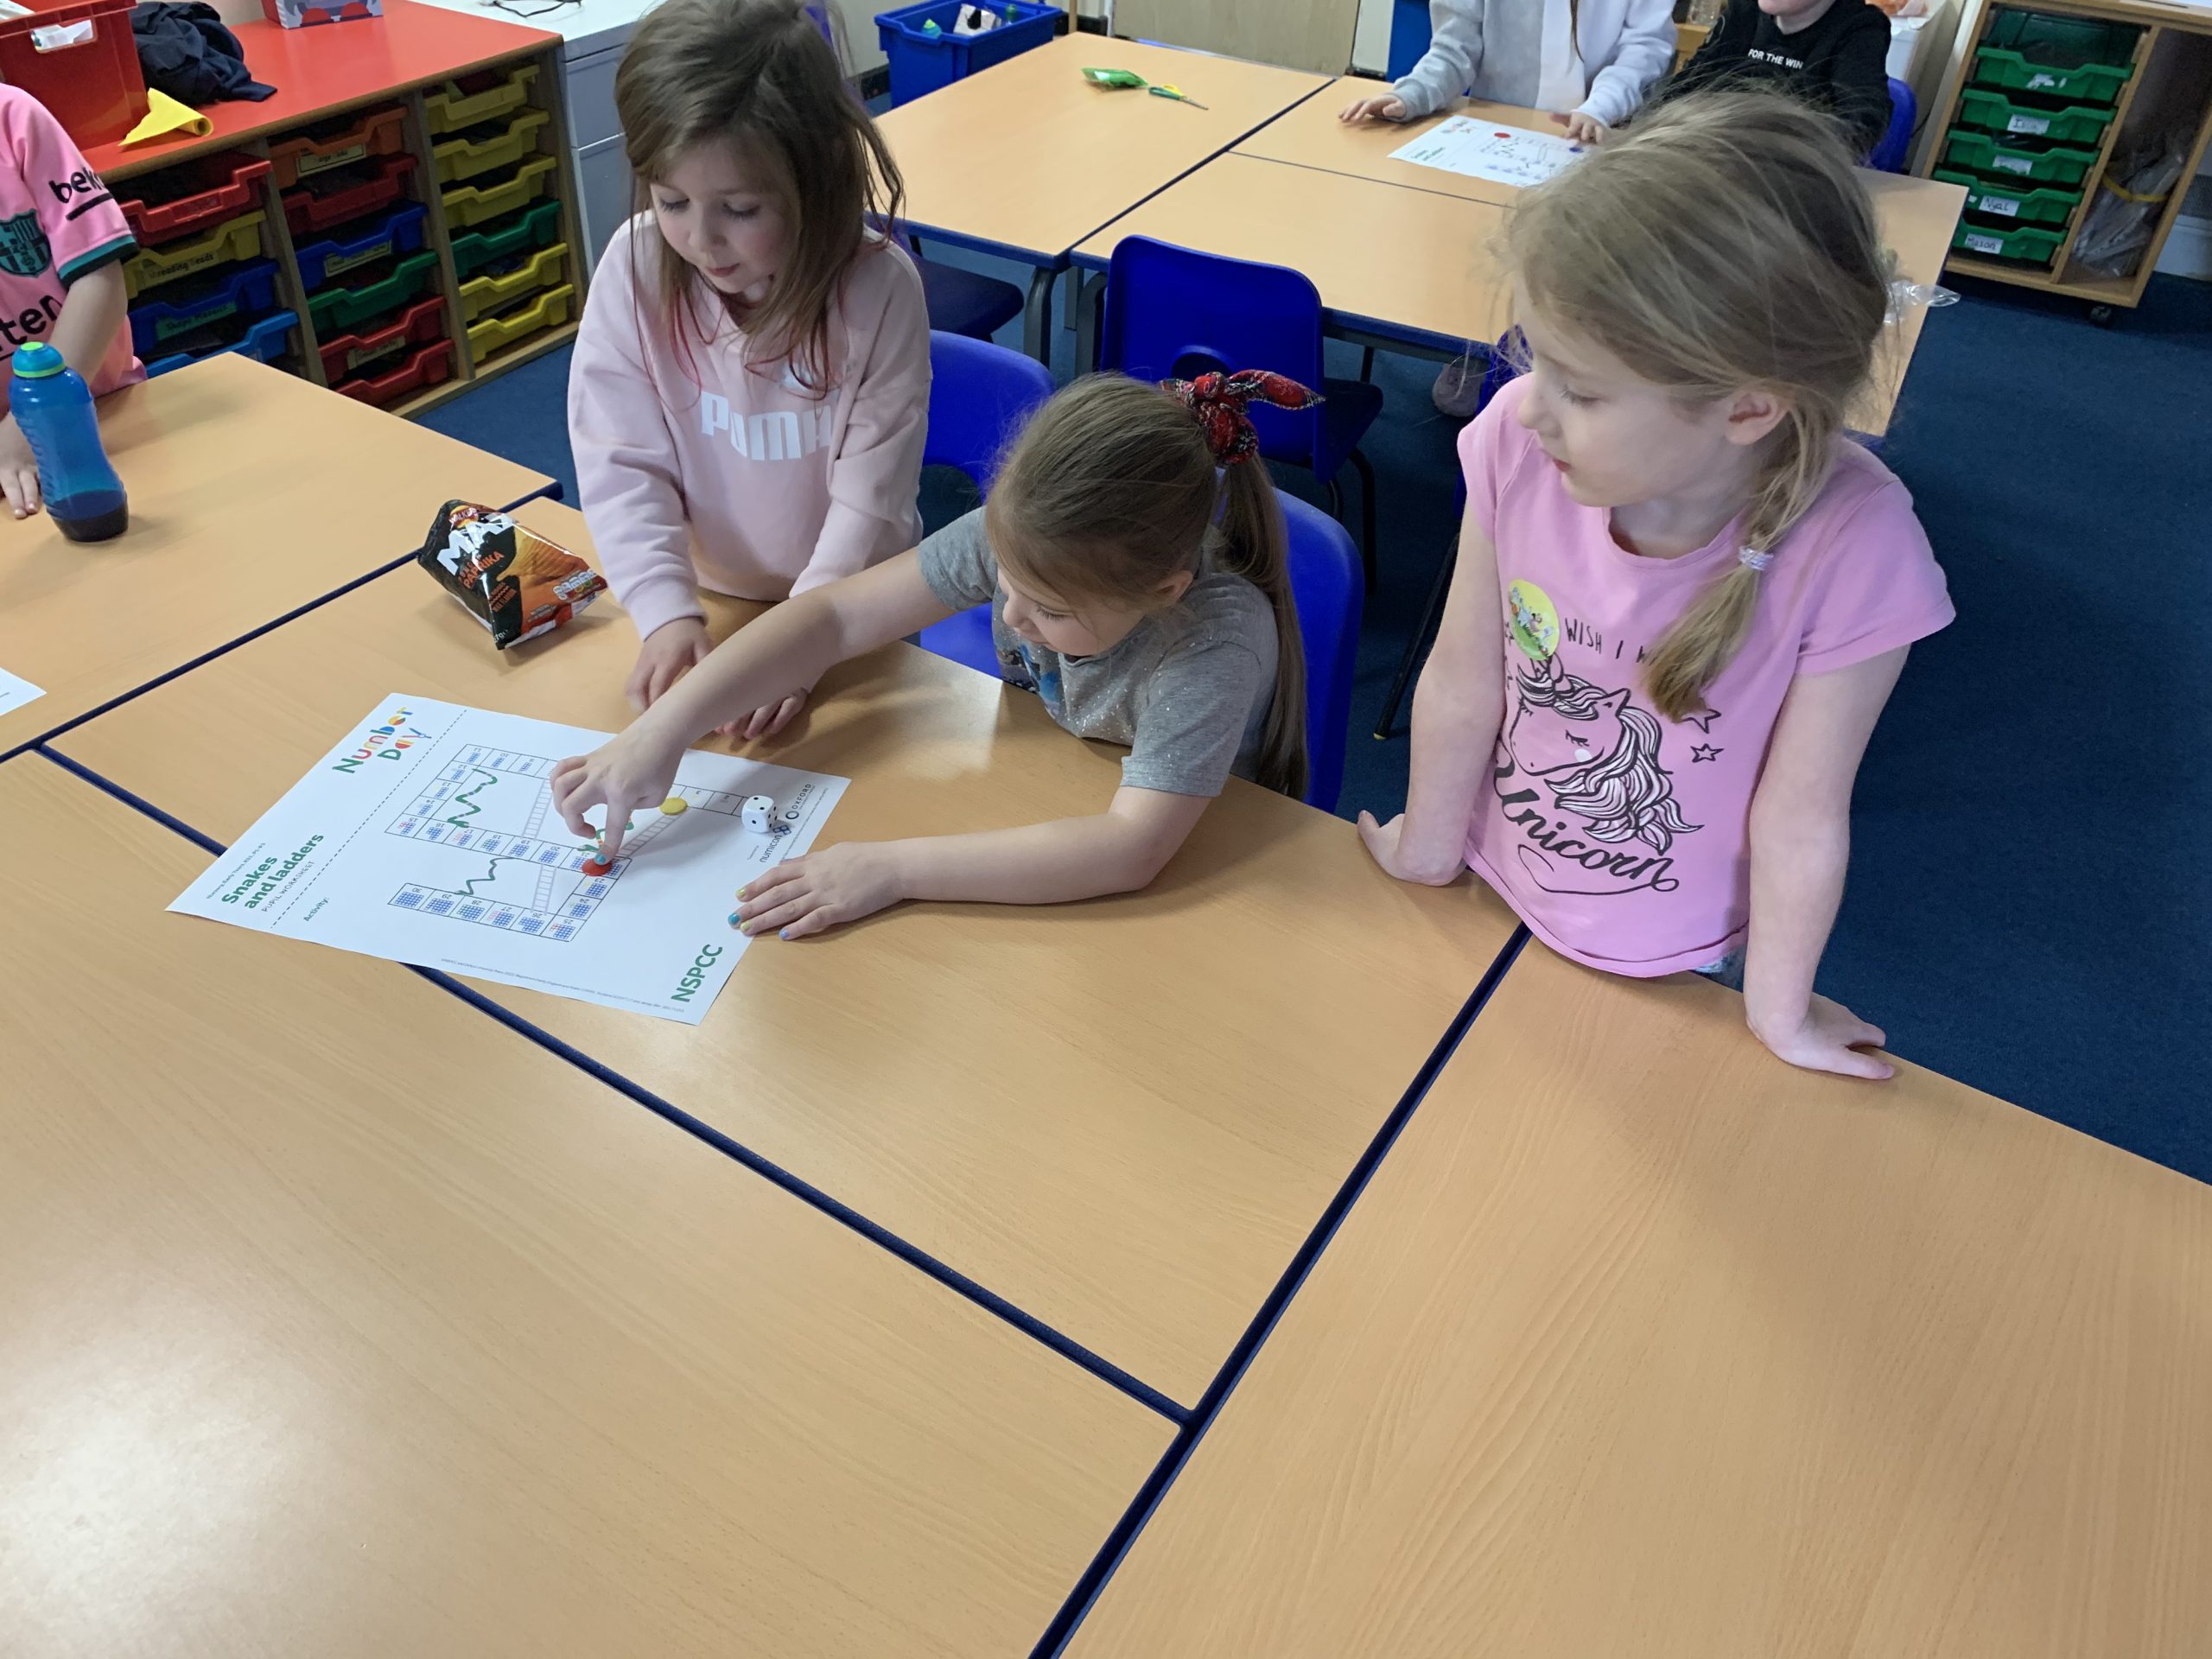 Year 2 children solving maths problems for number day